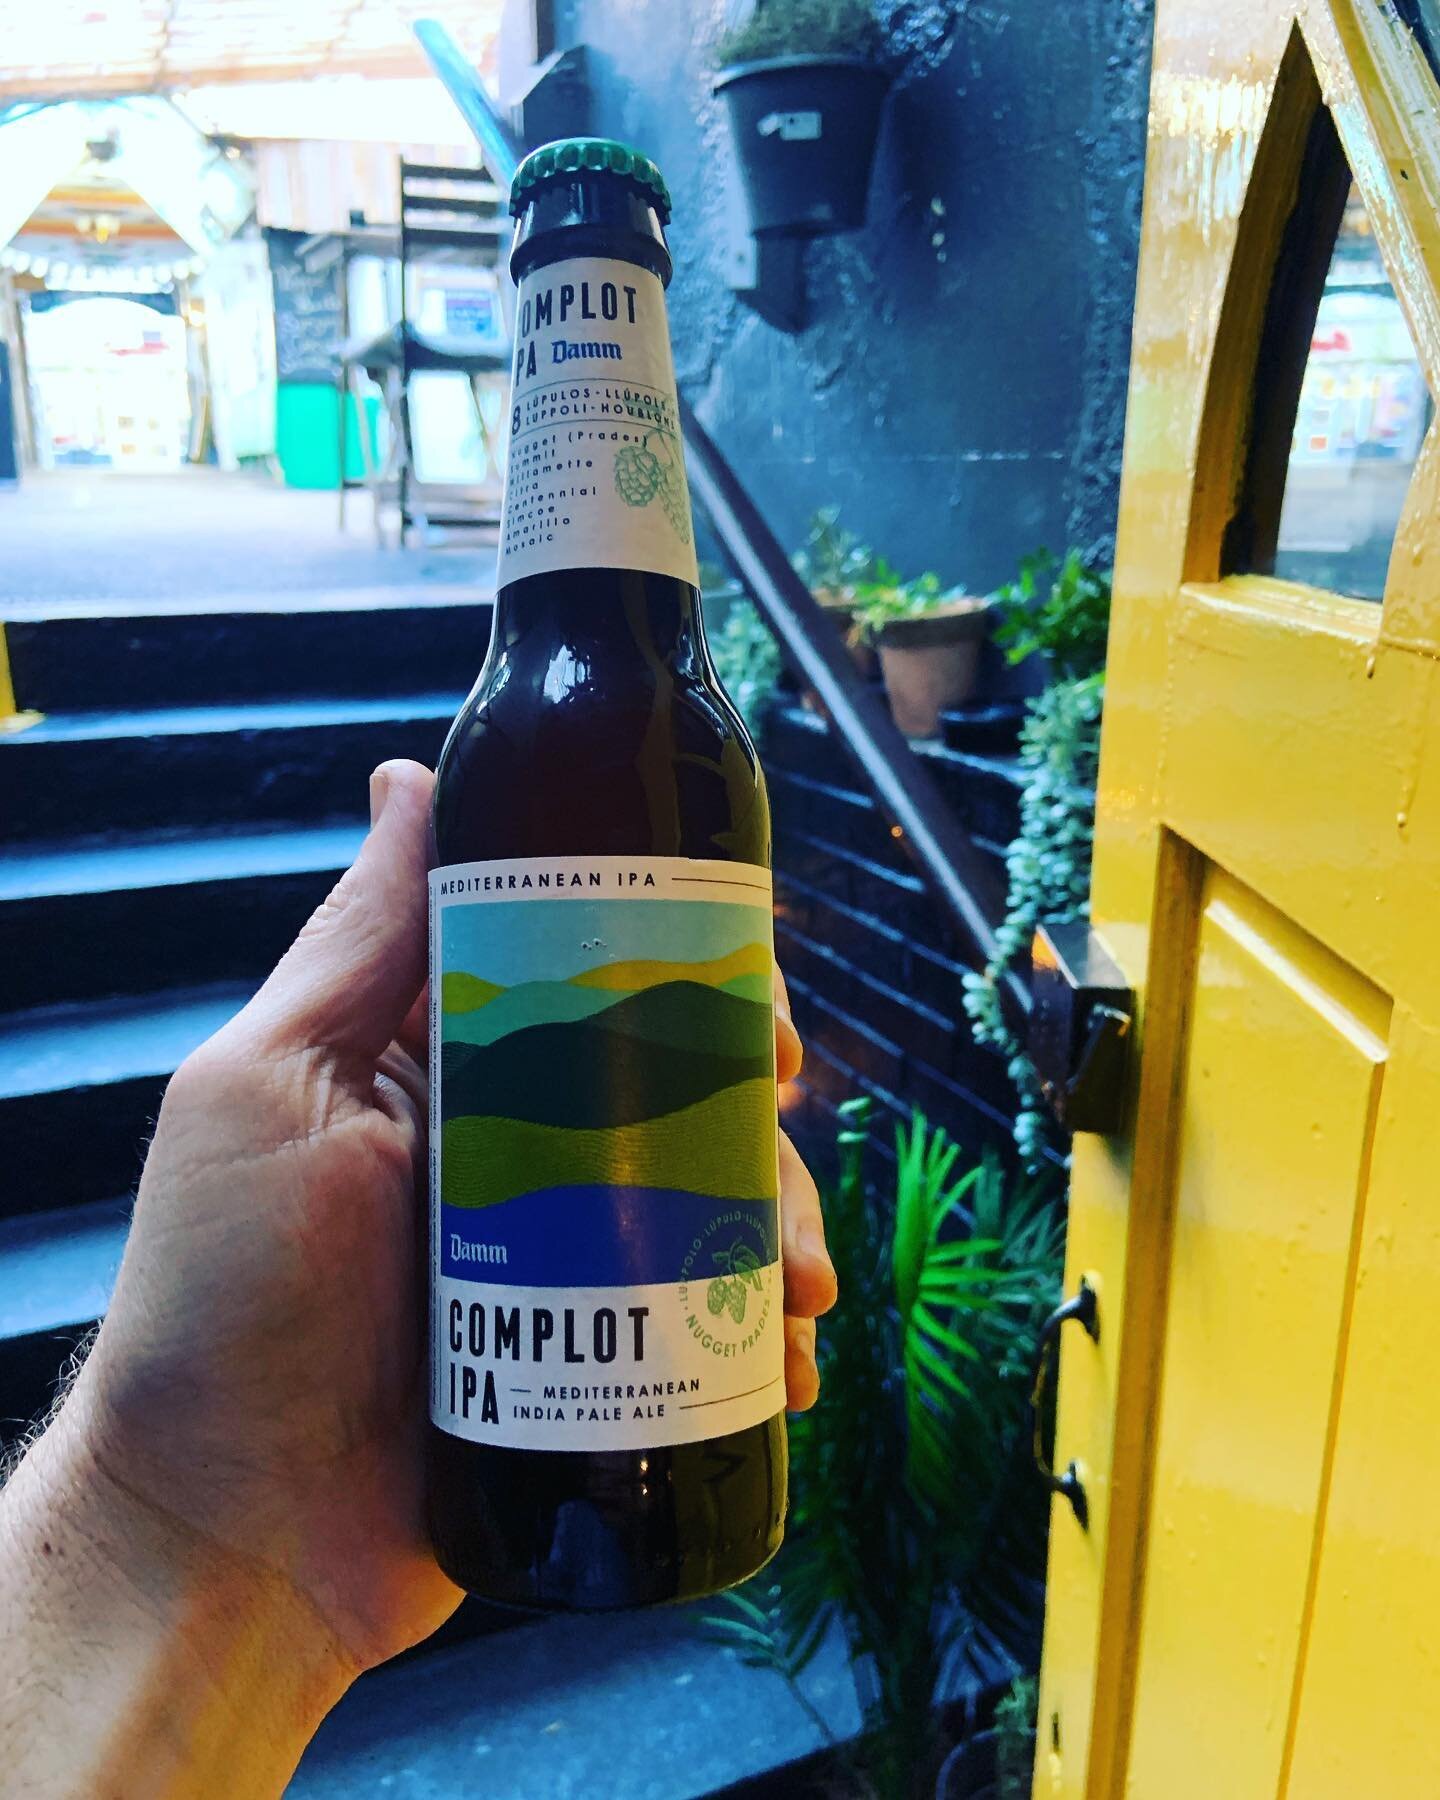 Complot IPA - Mediterranean IPA:
This tasty little IPA is full of flavour. Citrus and tropical notes 😋 
#damm #estrella #blackrockmarket